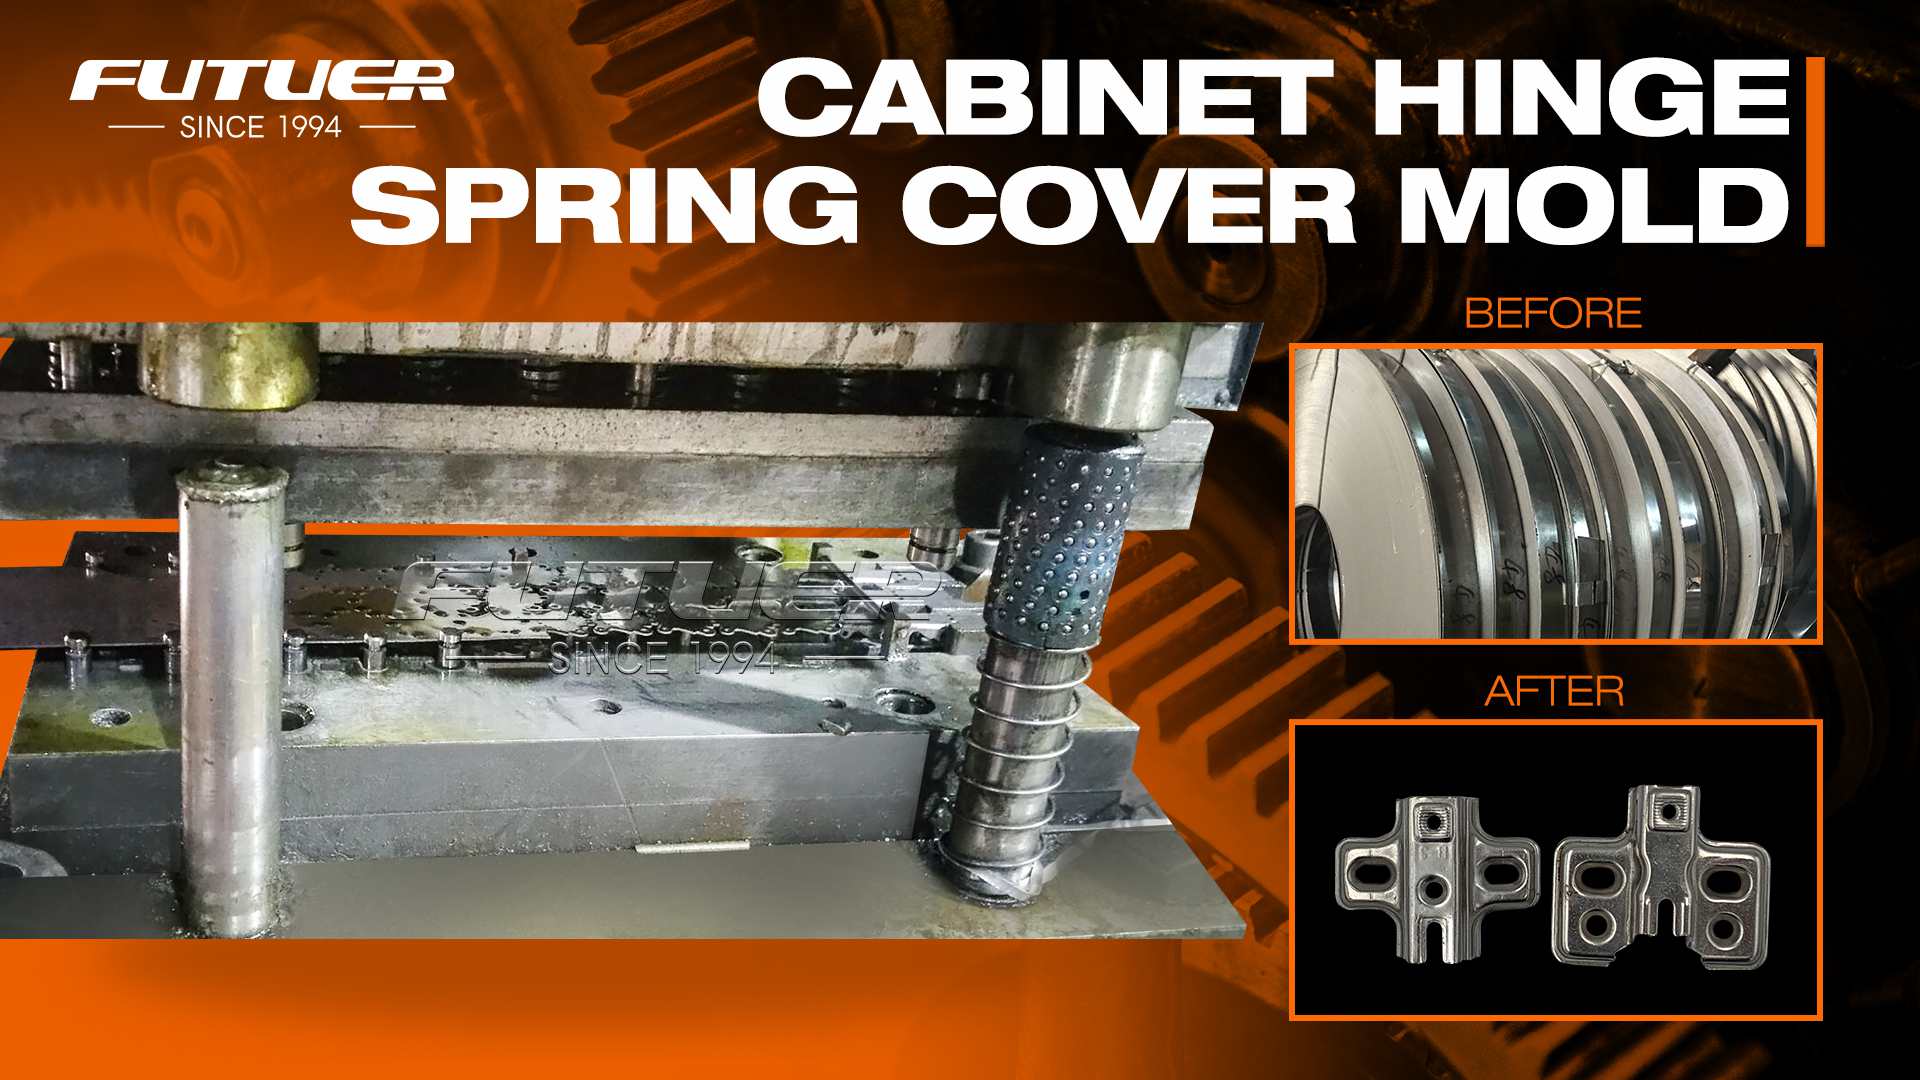 Cabinet hinge-Spring Cover mold